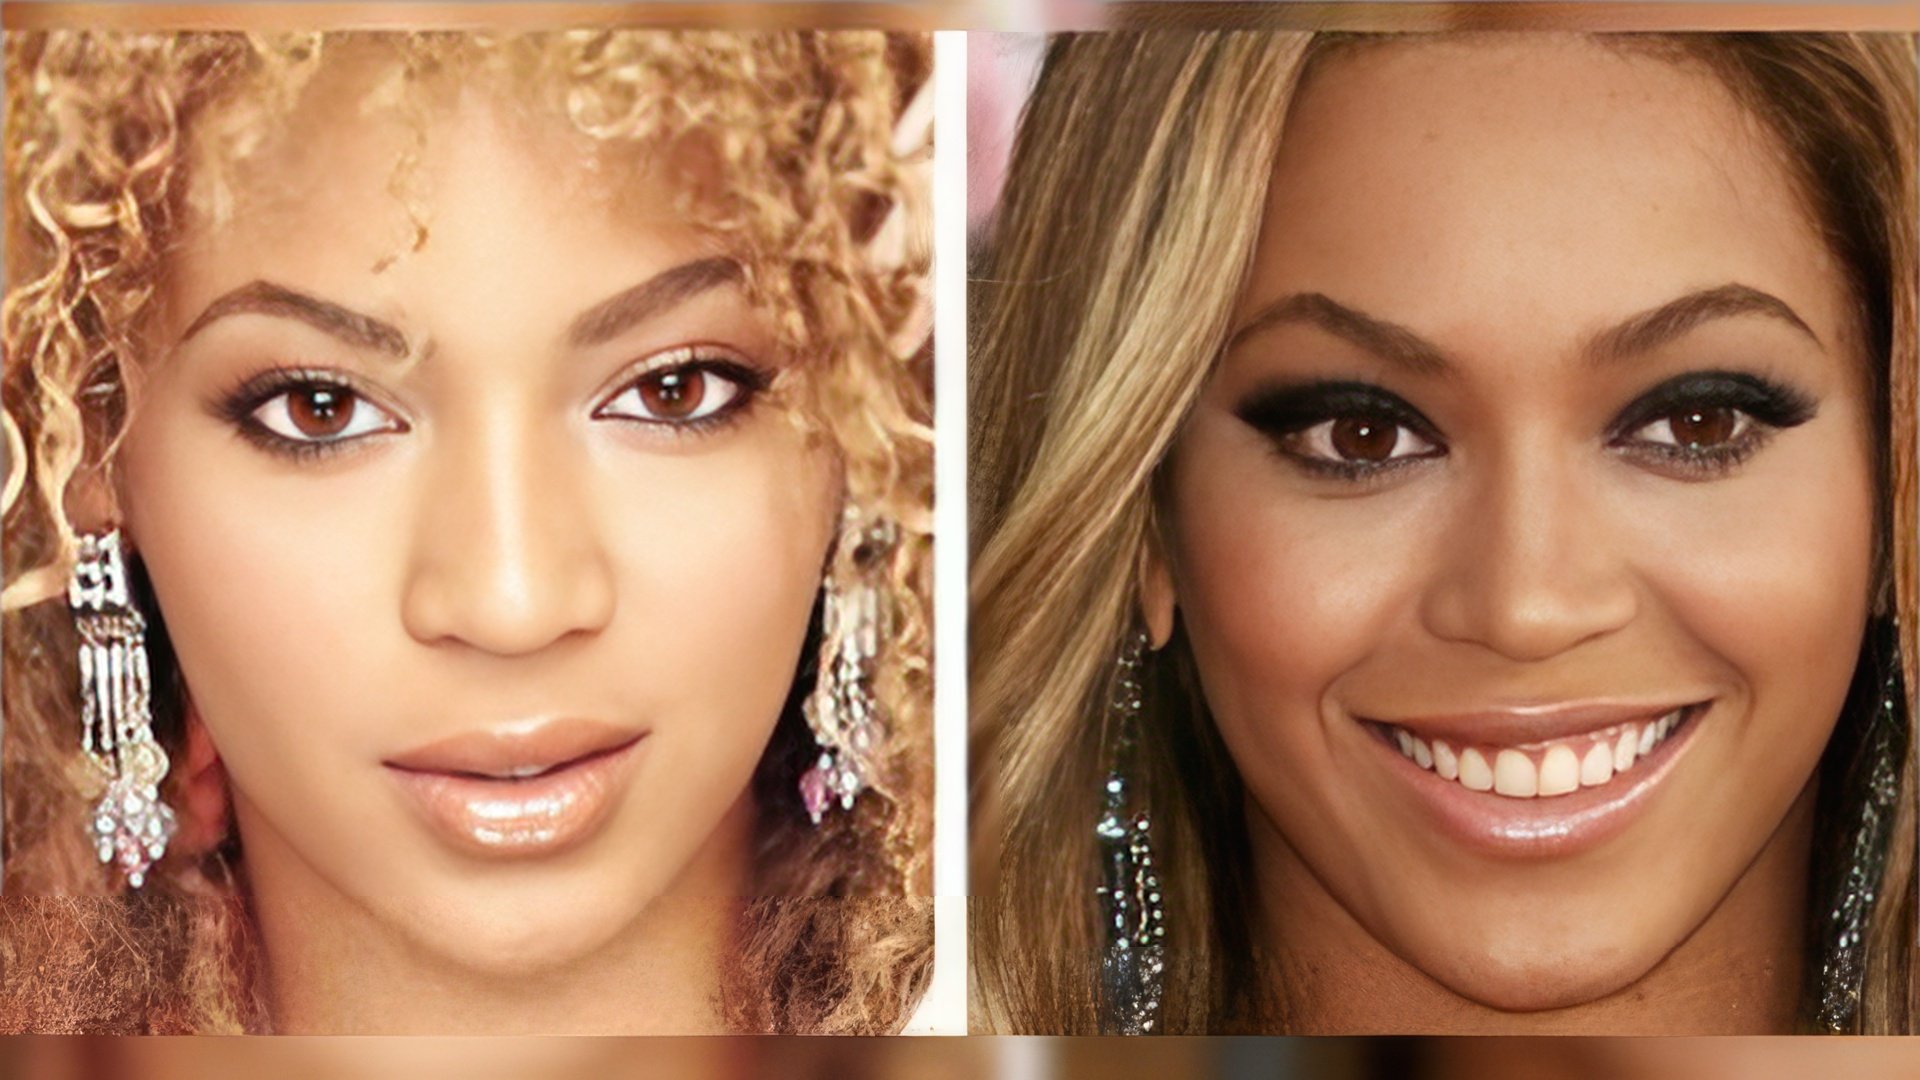 Beyoncé before and after plastic surgery of the nose (2000 vs 2010)